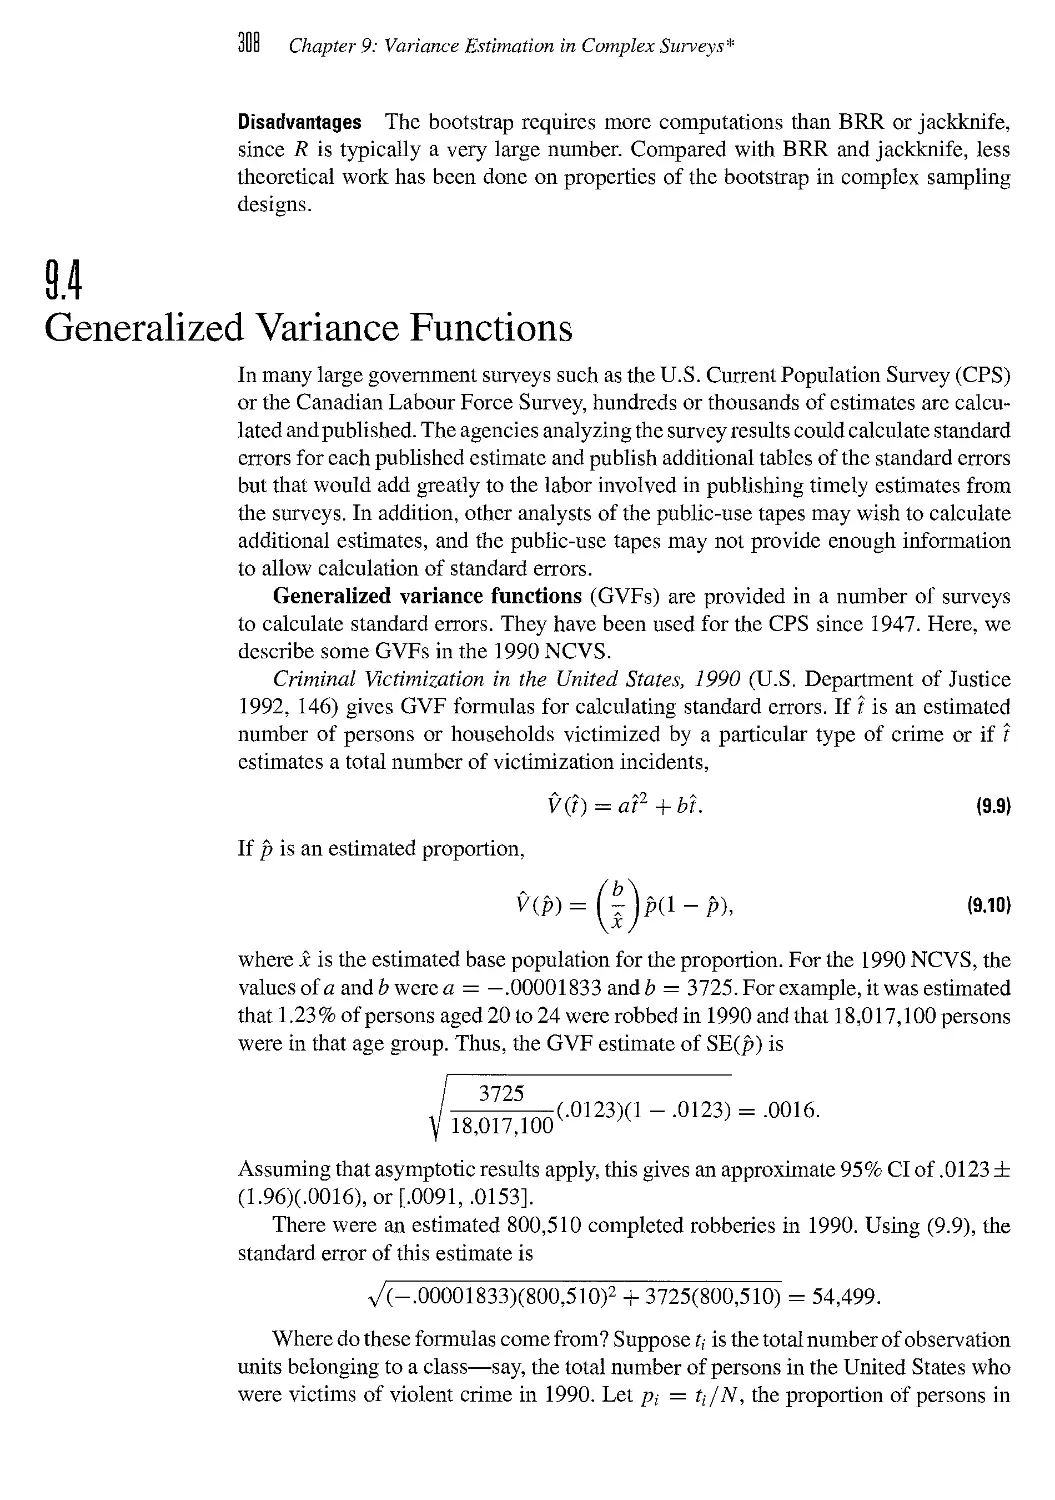 9.4 Generalized Variance Functions